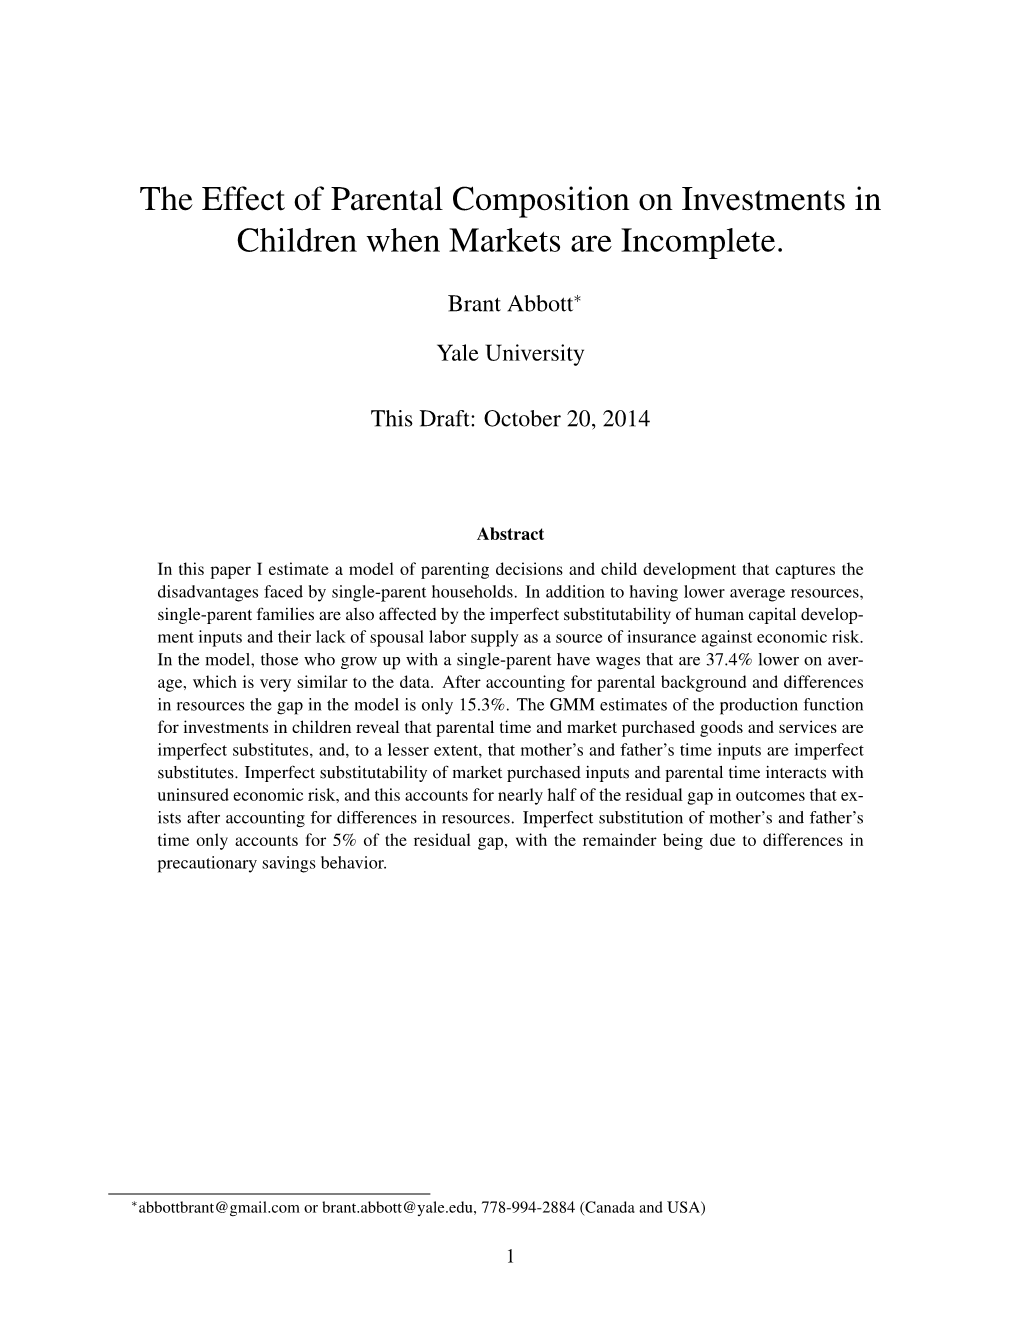 The Effect of Parental Composition on Investments in Children When Markets Are Incomplete